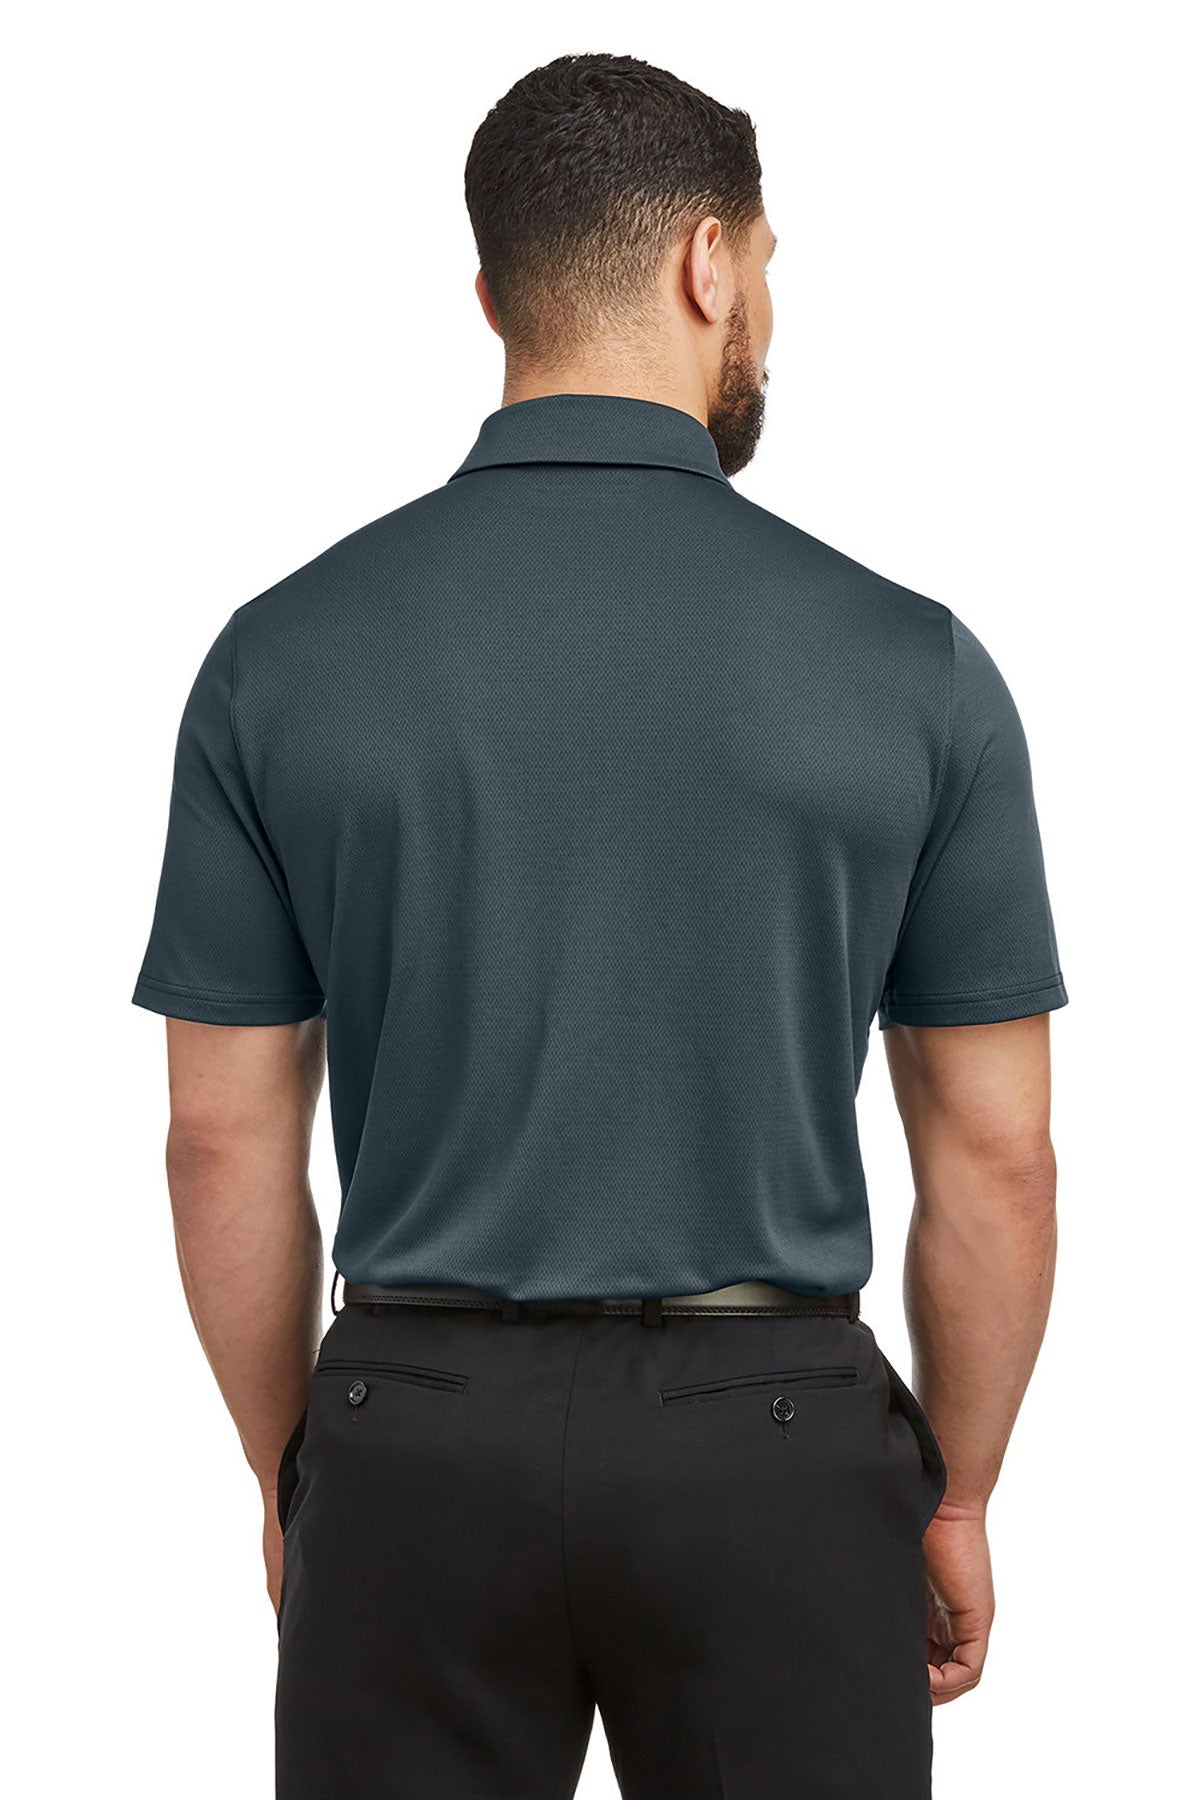 Under Armour Men's Tech Polo, Stealth Grey [GuidePoint Security]